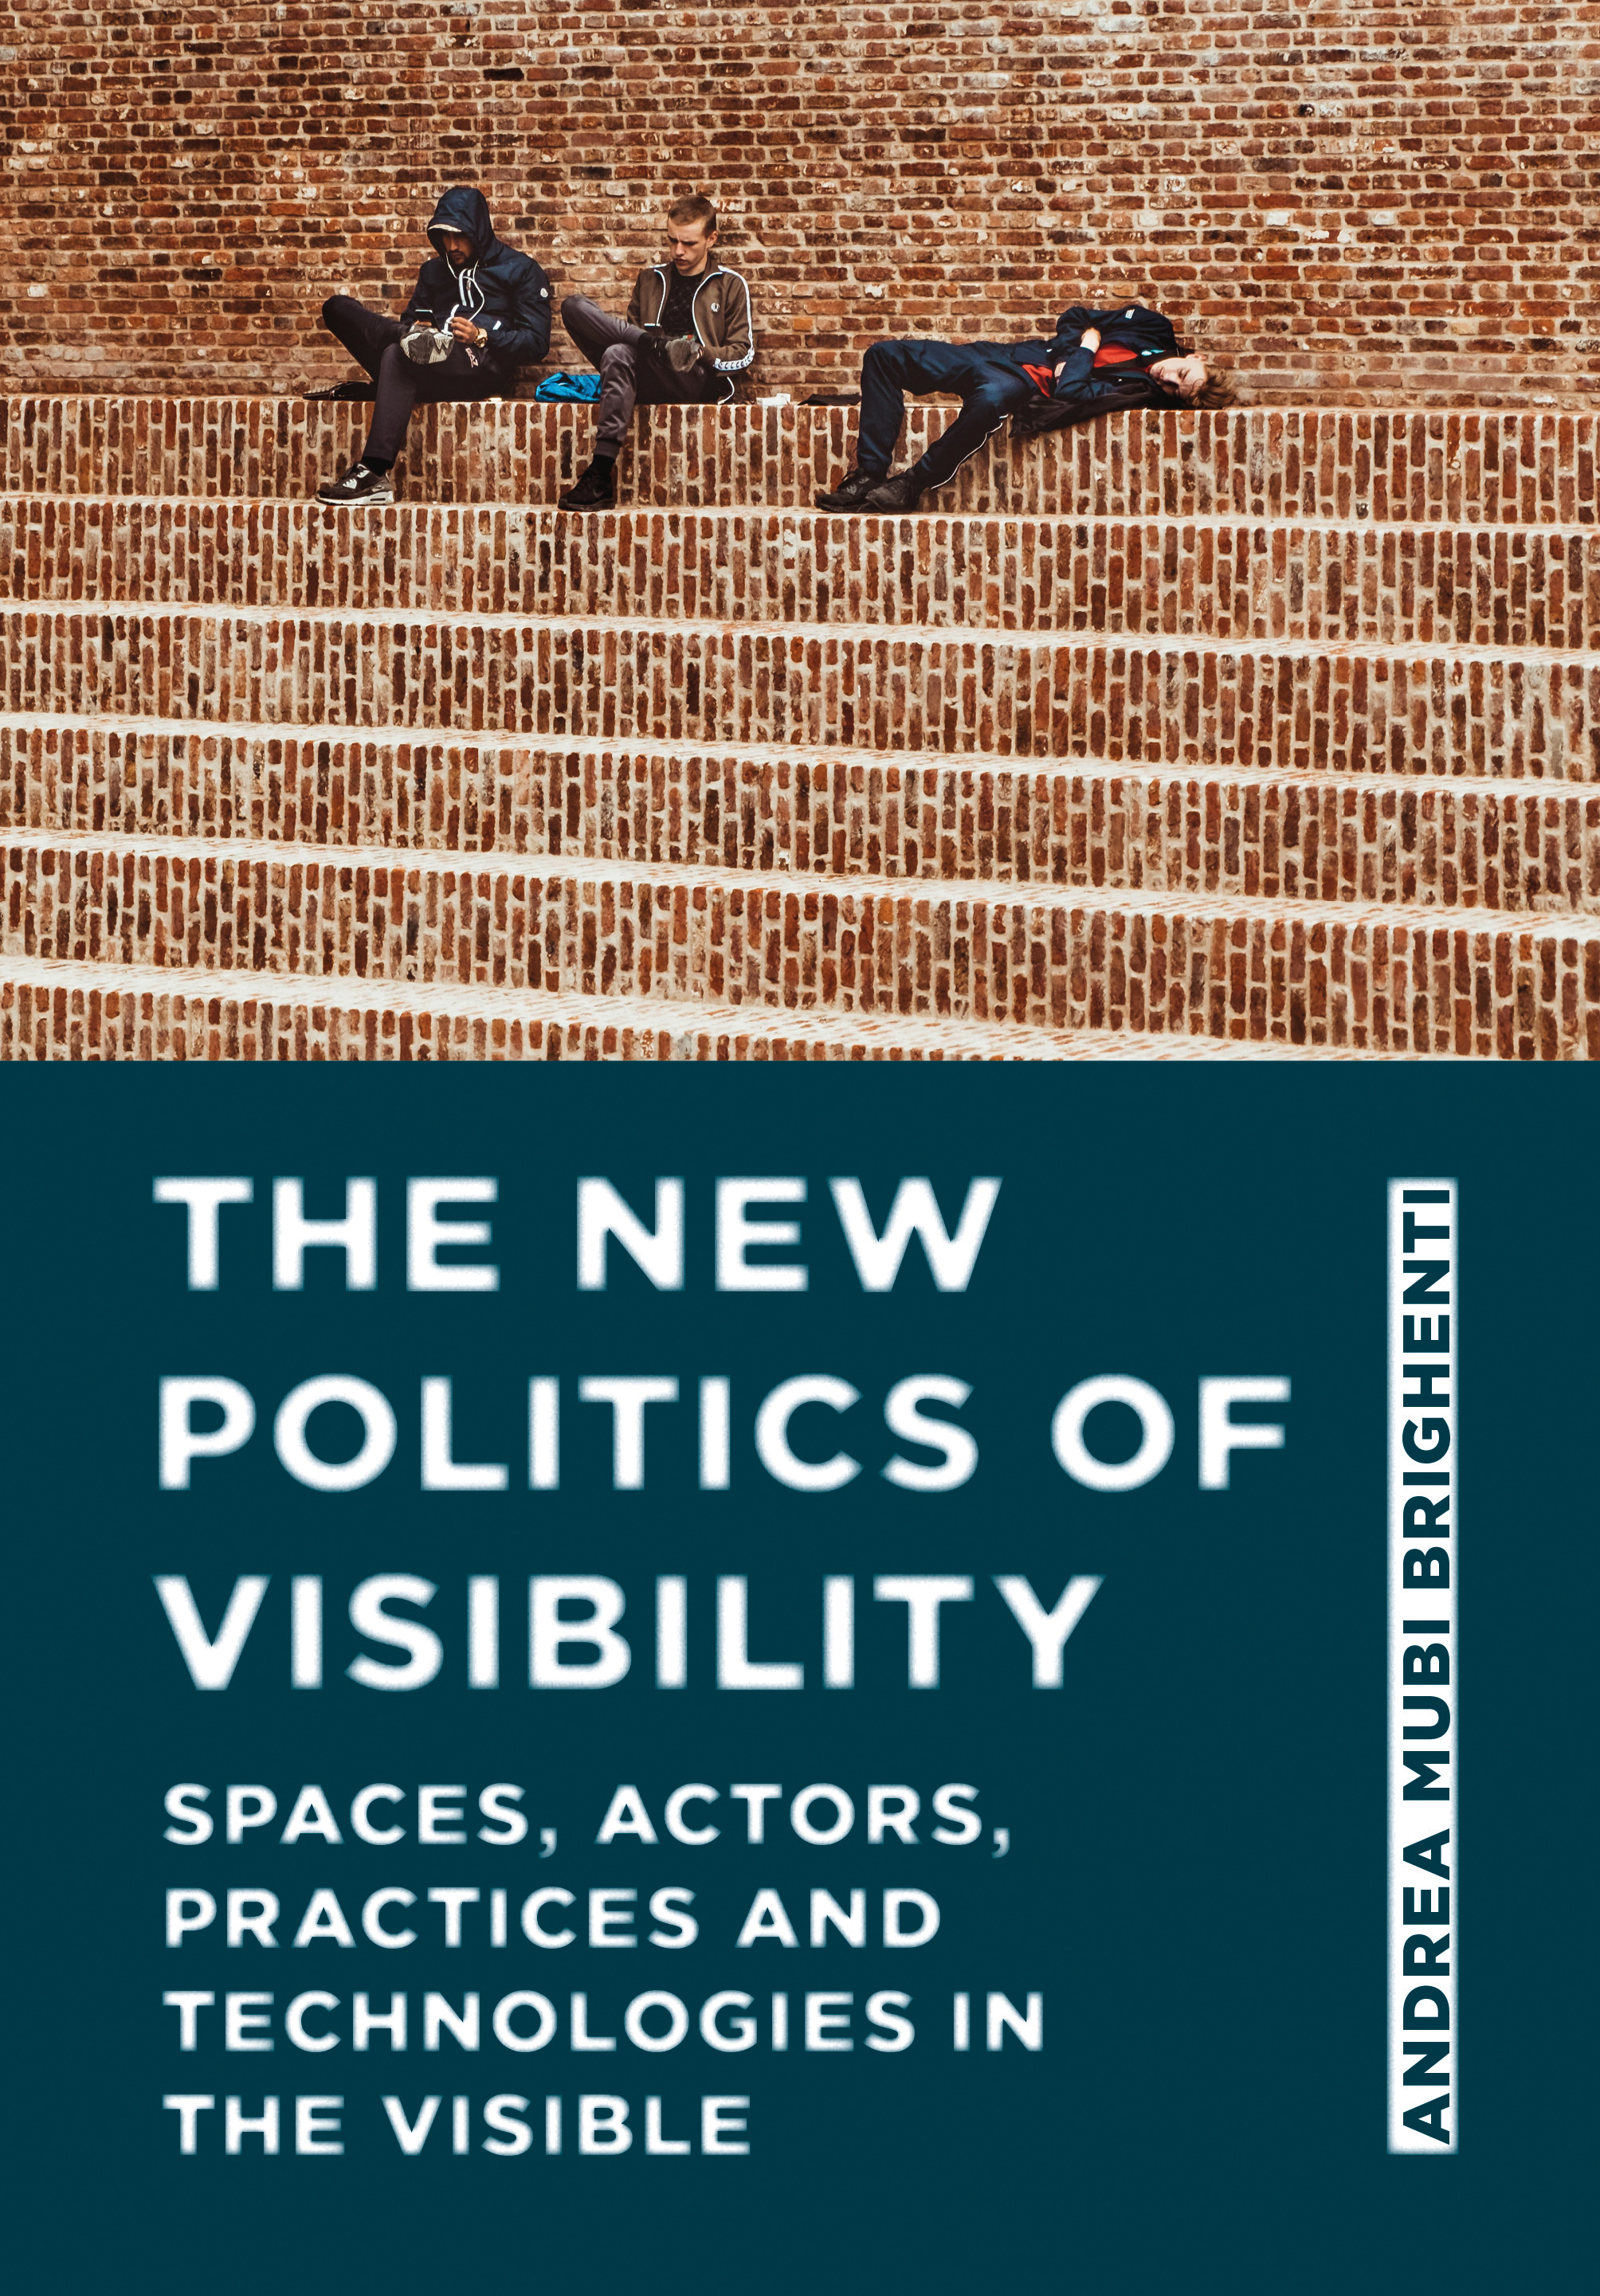 image of The New Politics of Visibility